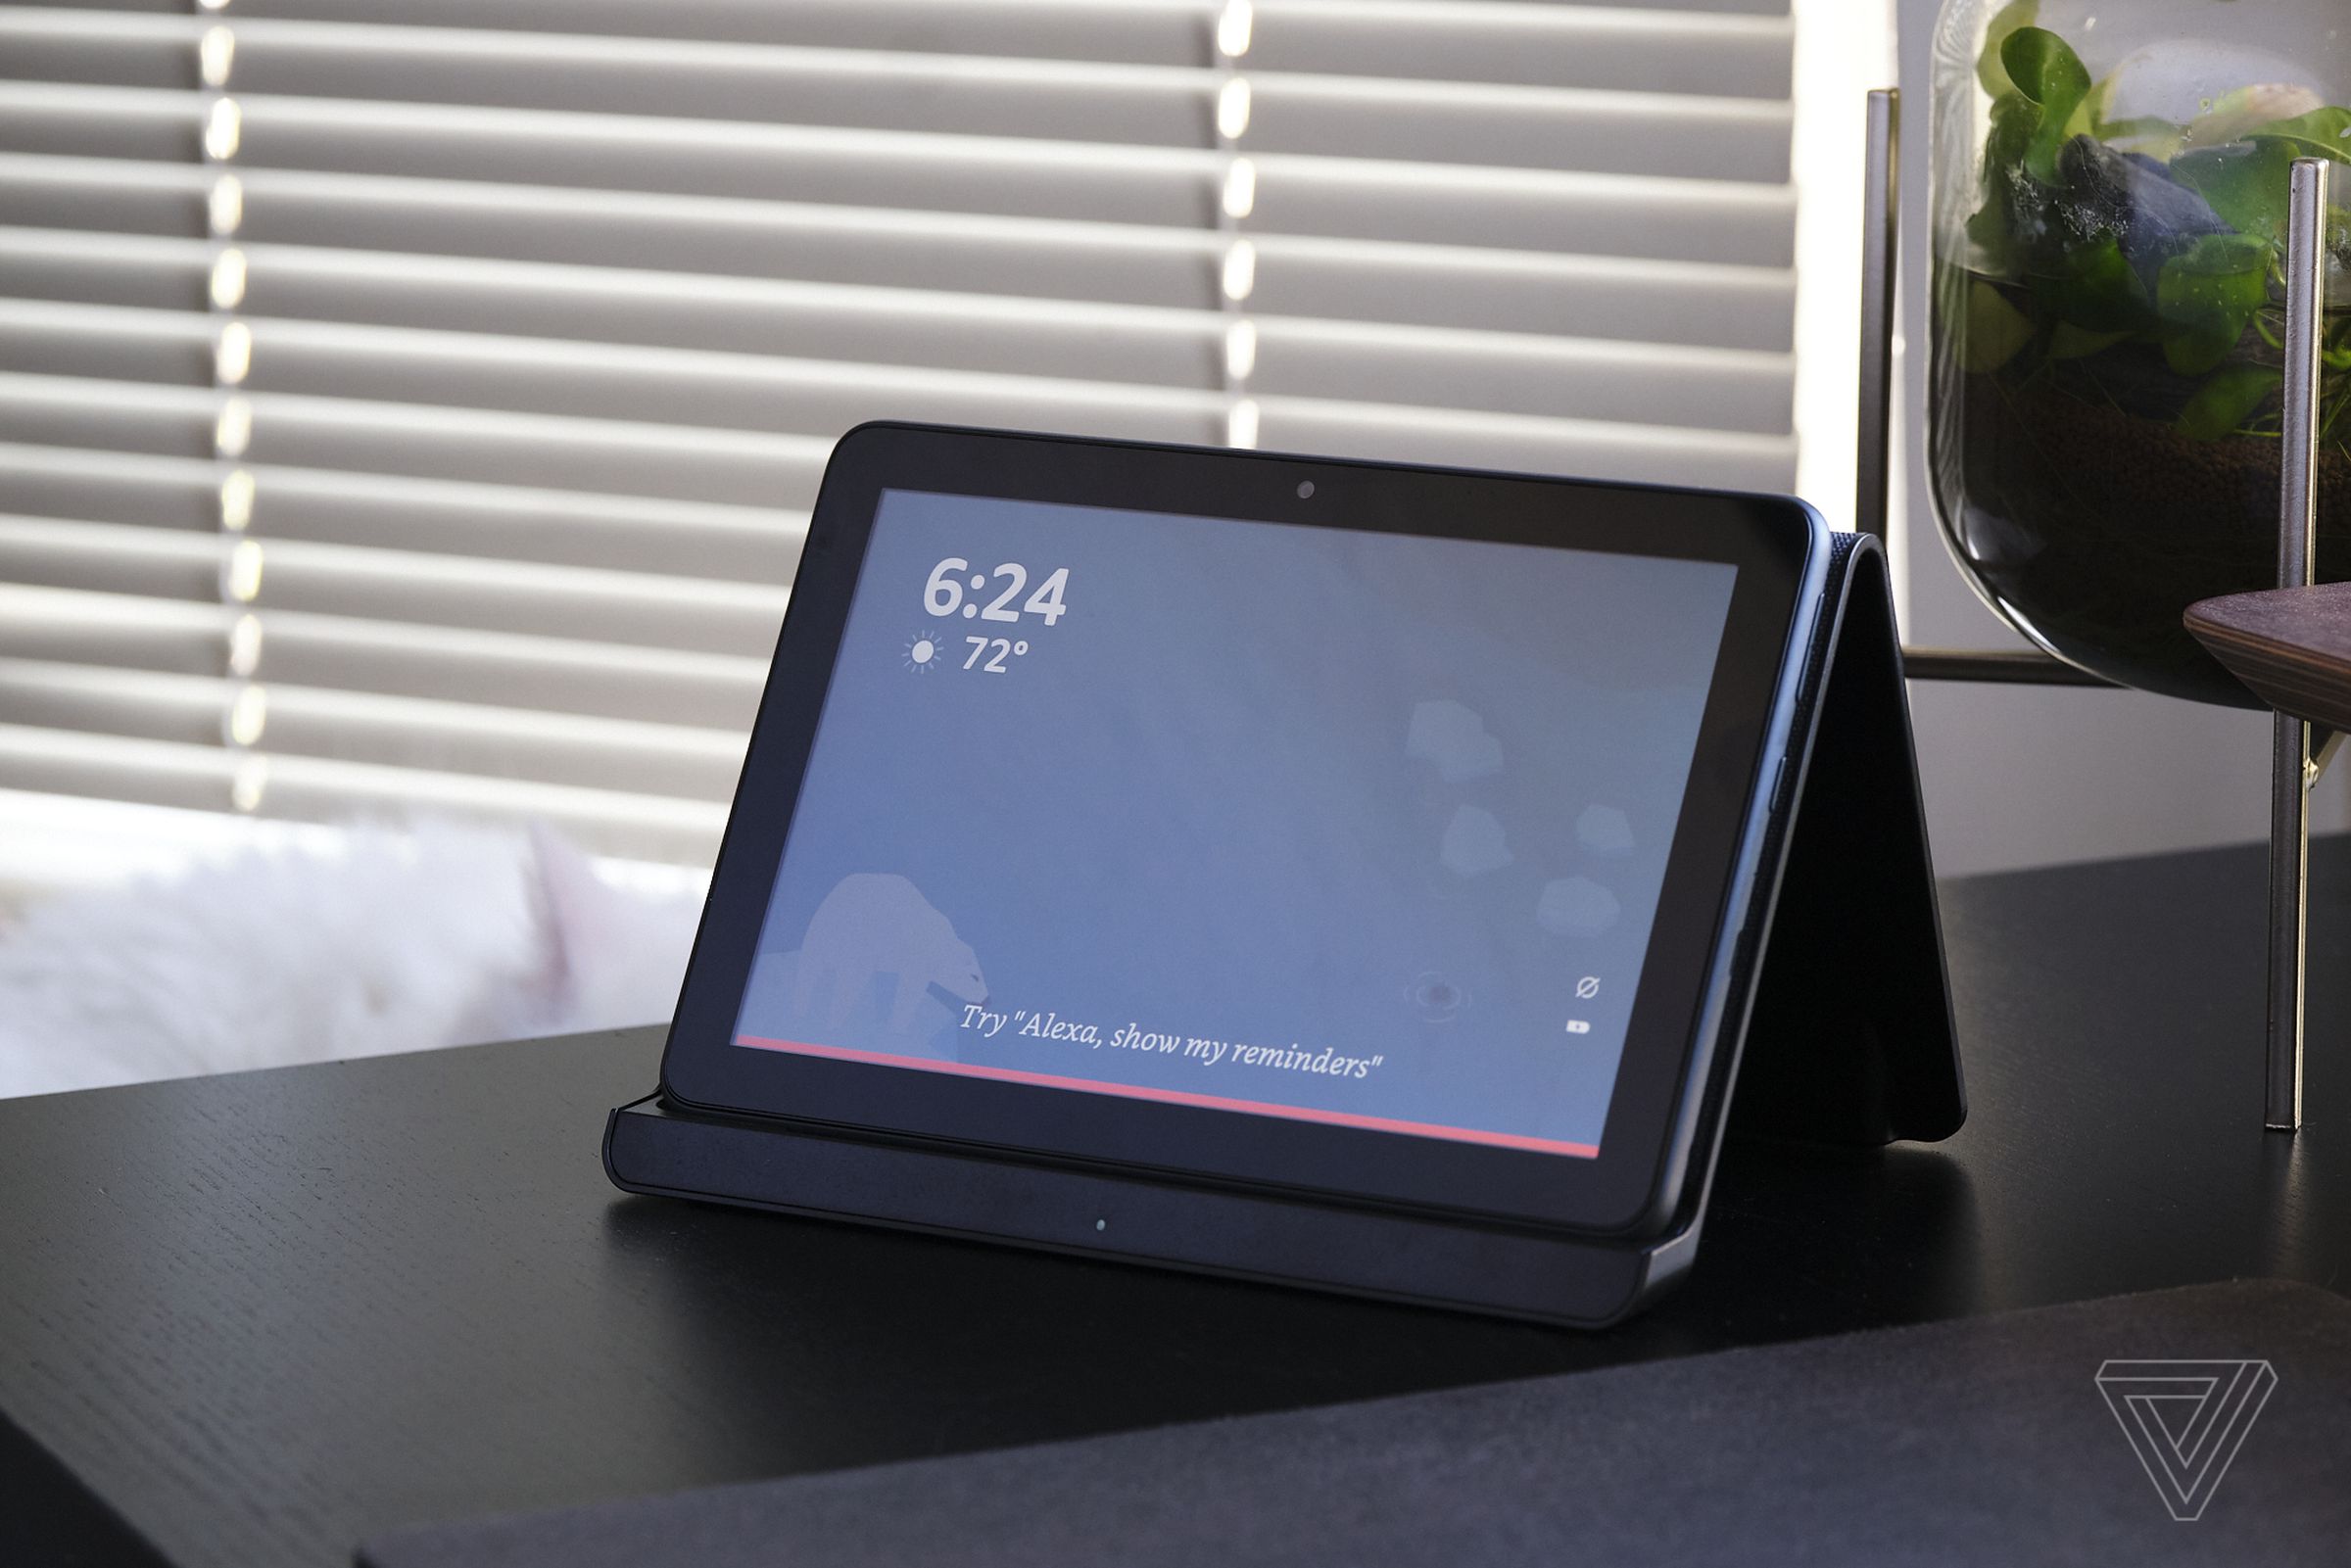 When set on a wireless charger, the tablet can enter “Show Mode” and act just like an Amazon Echo Show.